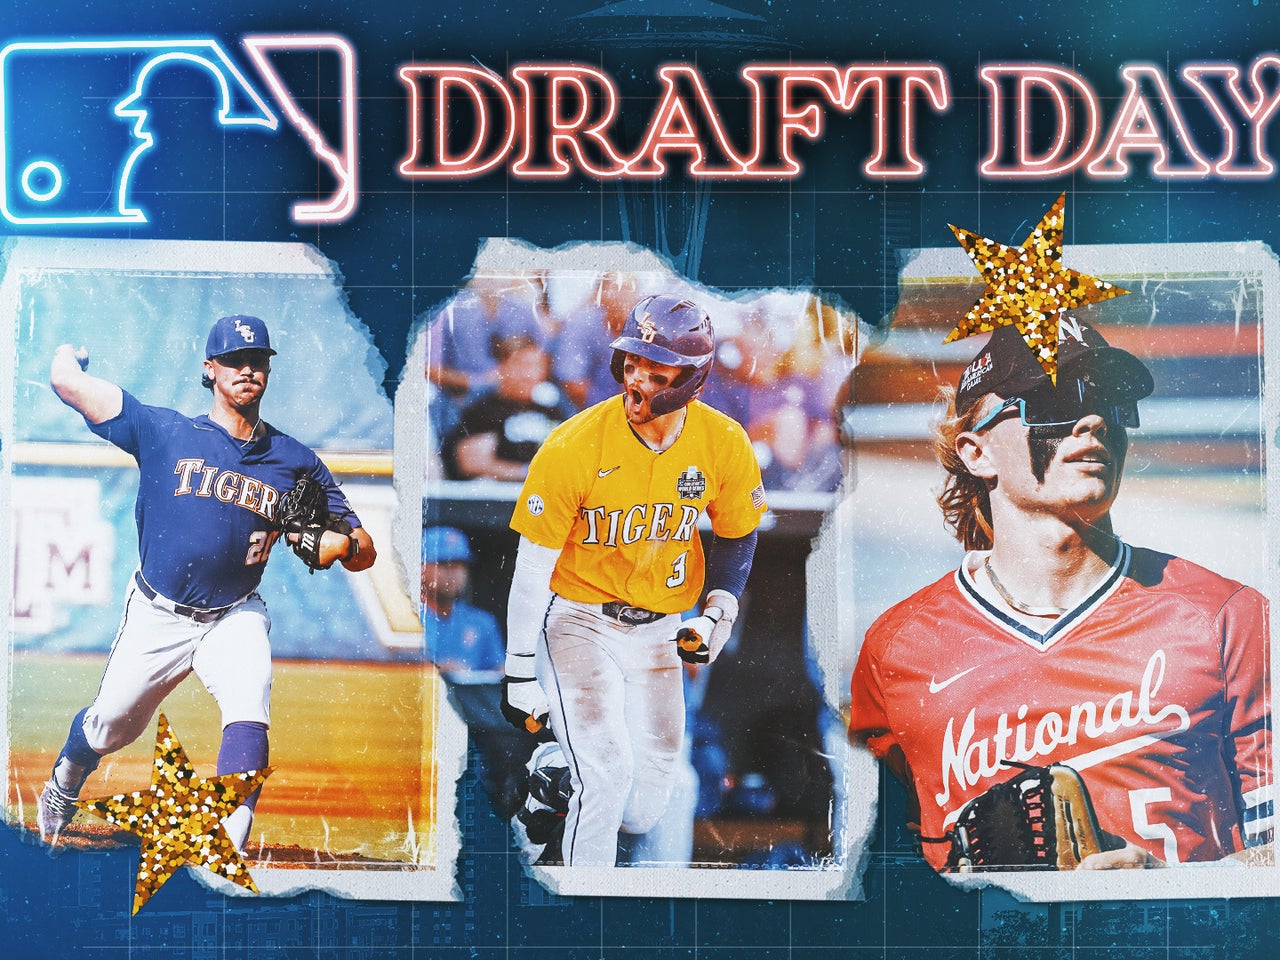 Plenty of top baseball players were drafted after fifth round